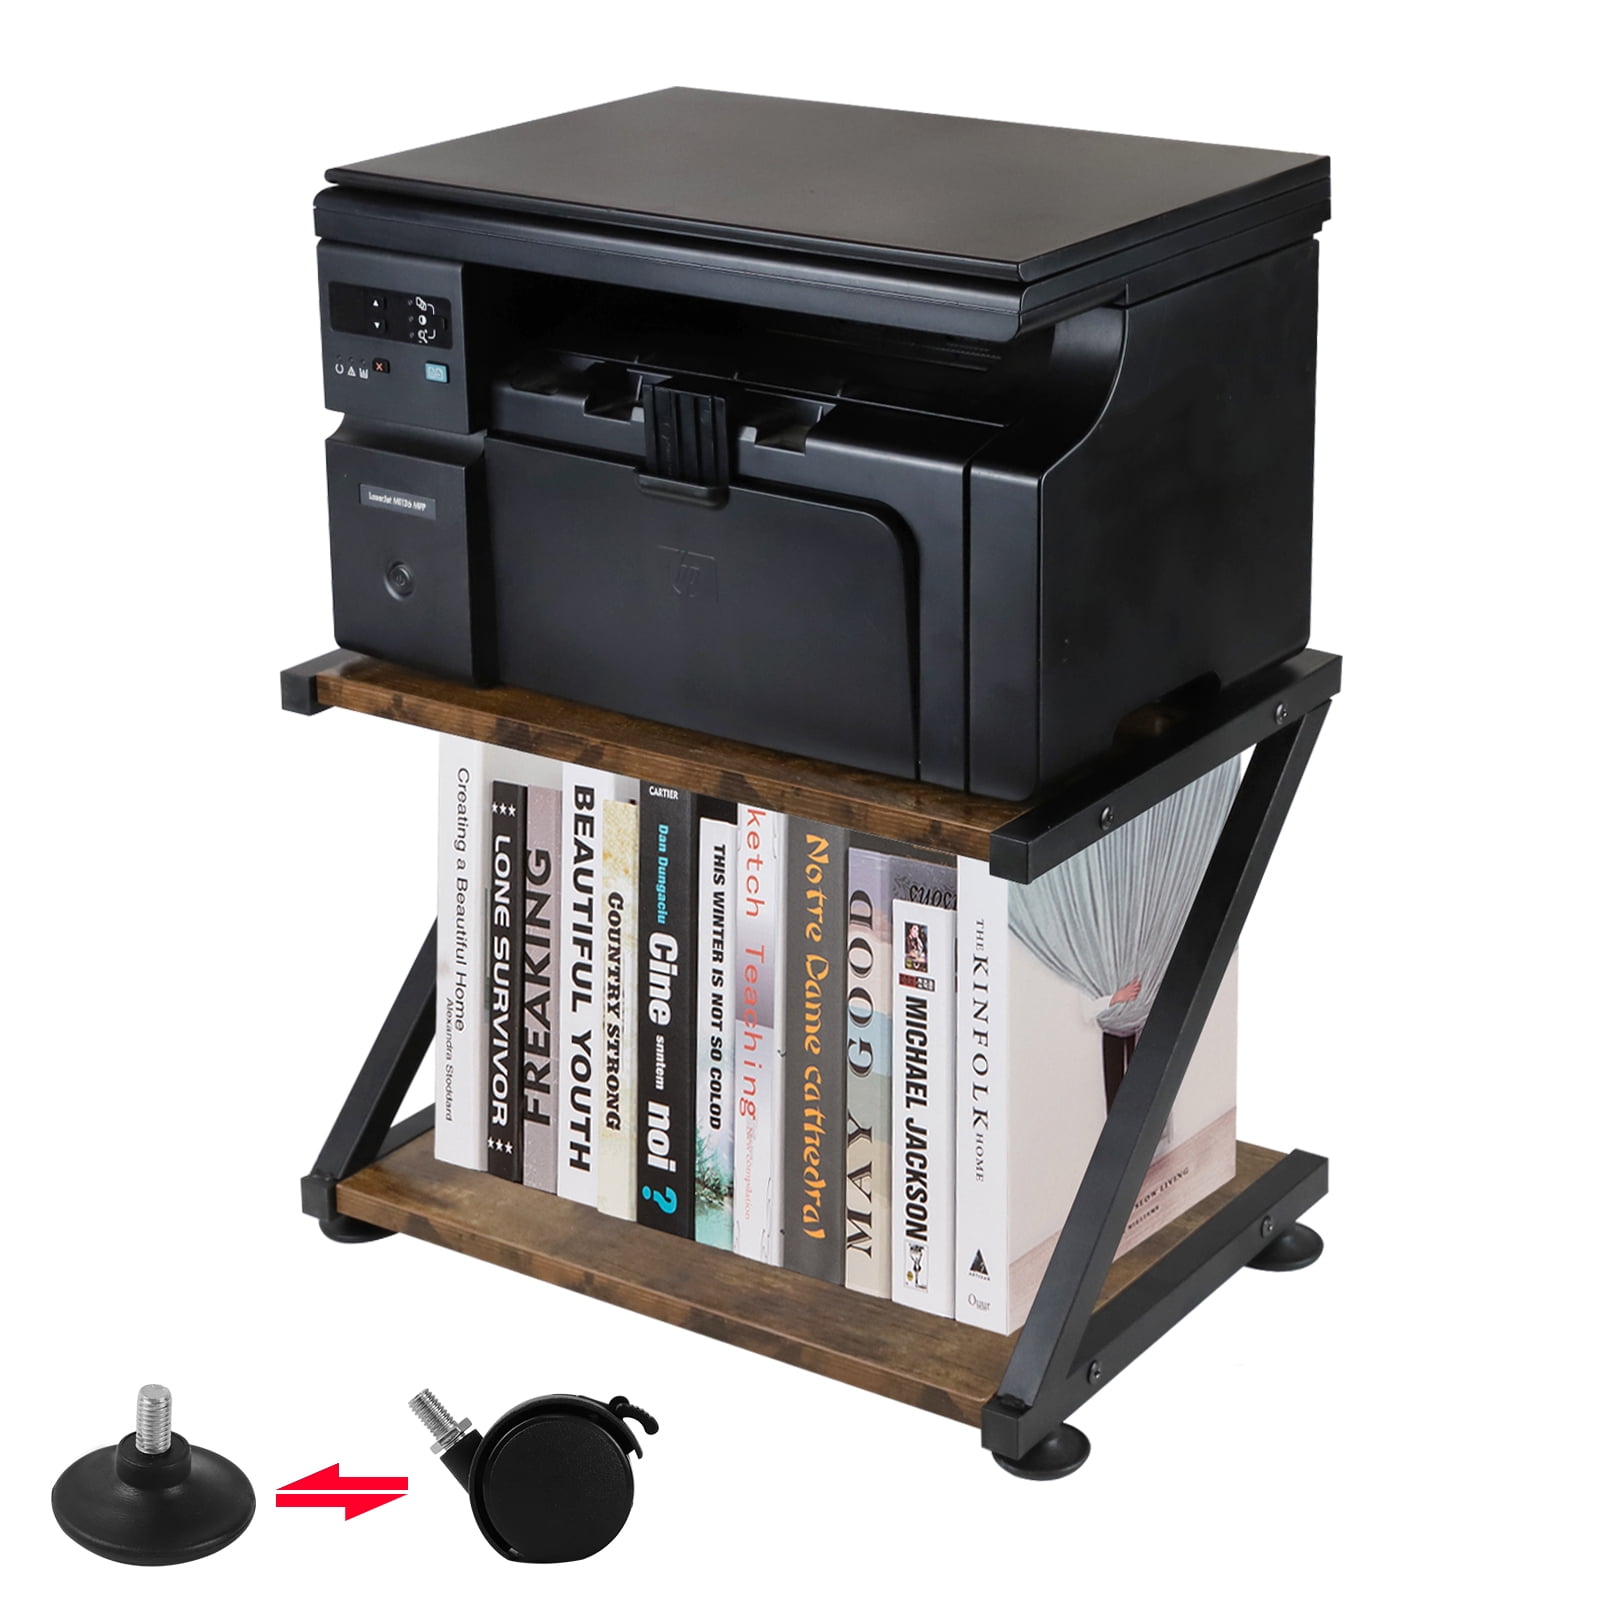 Faviu Home Supplies Printer Stand Wide Range Of Application for Home